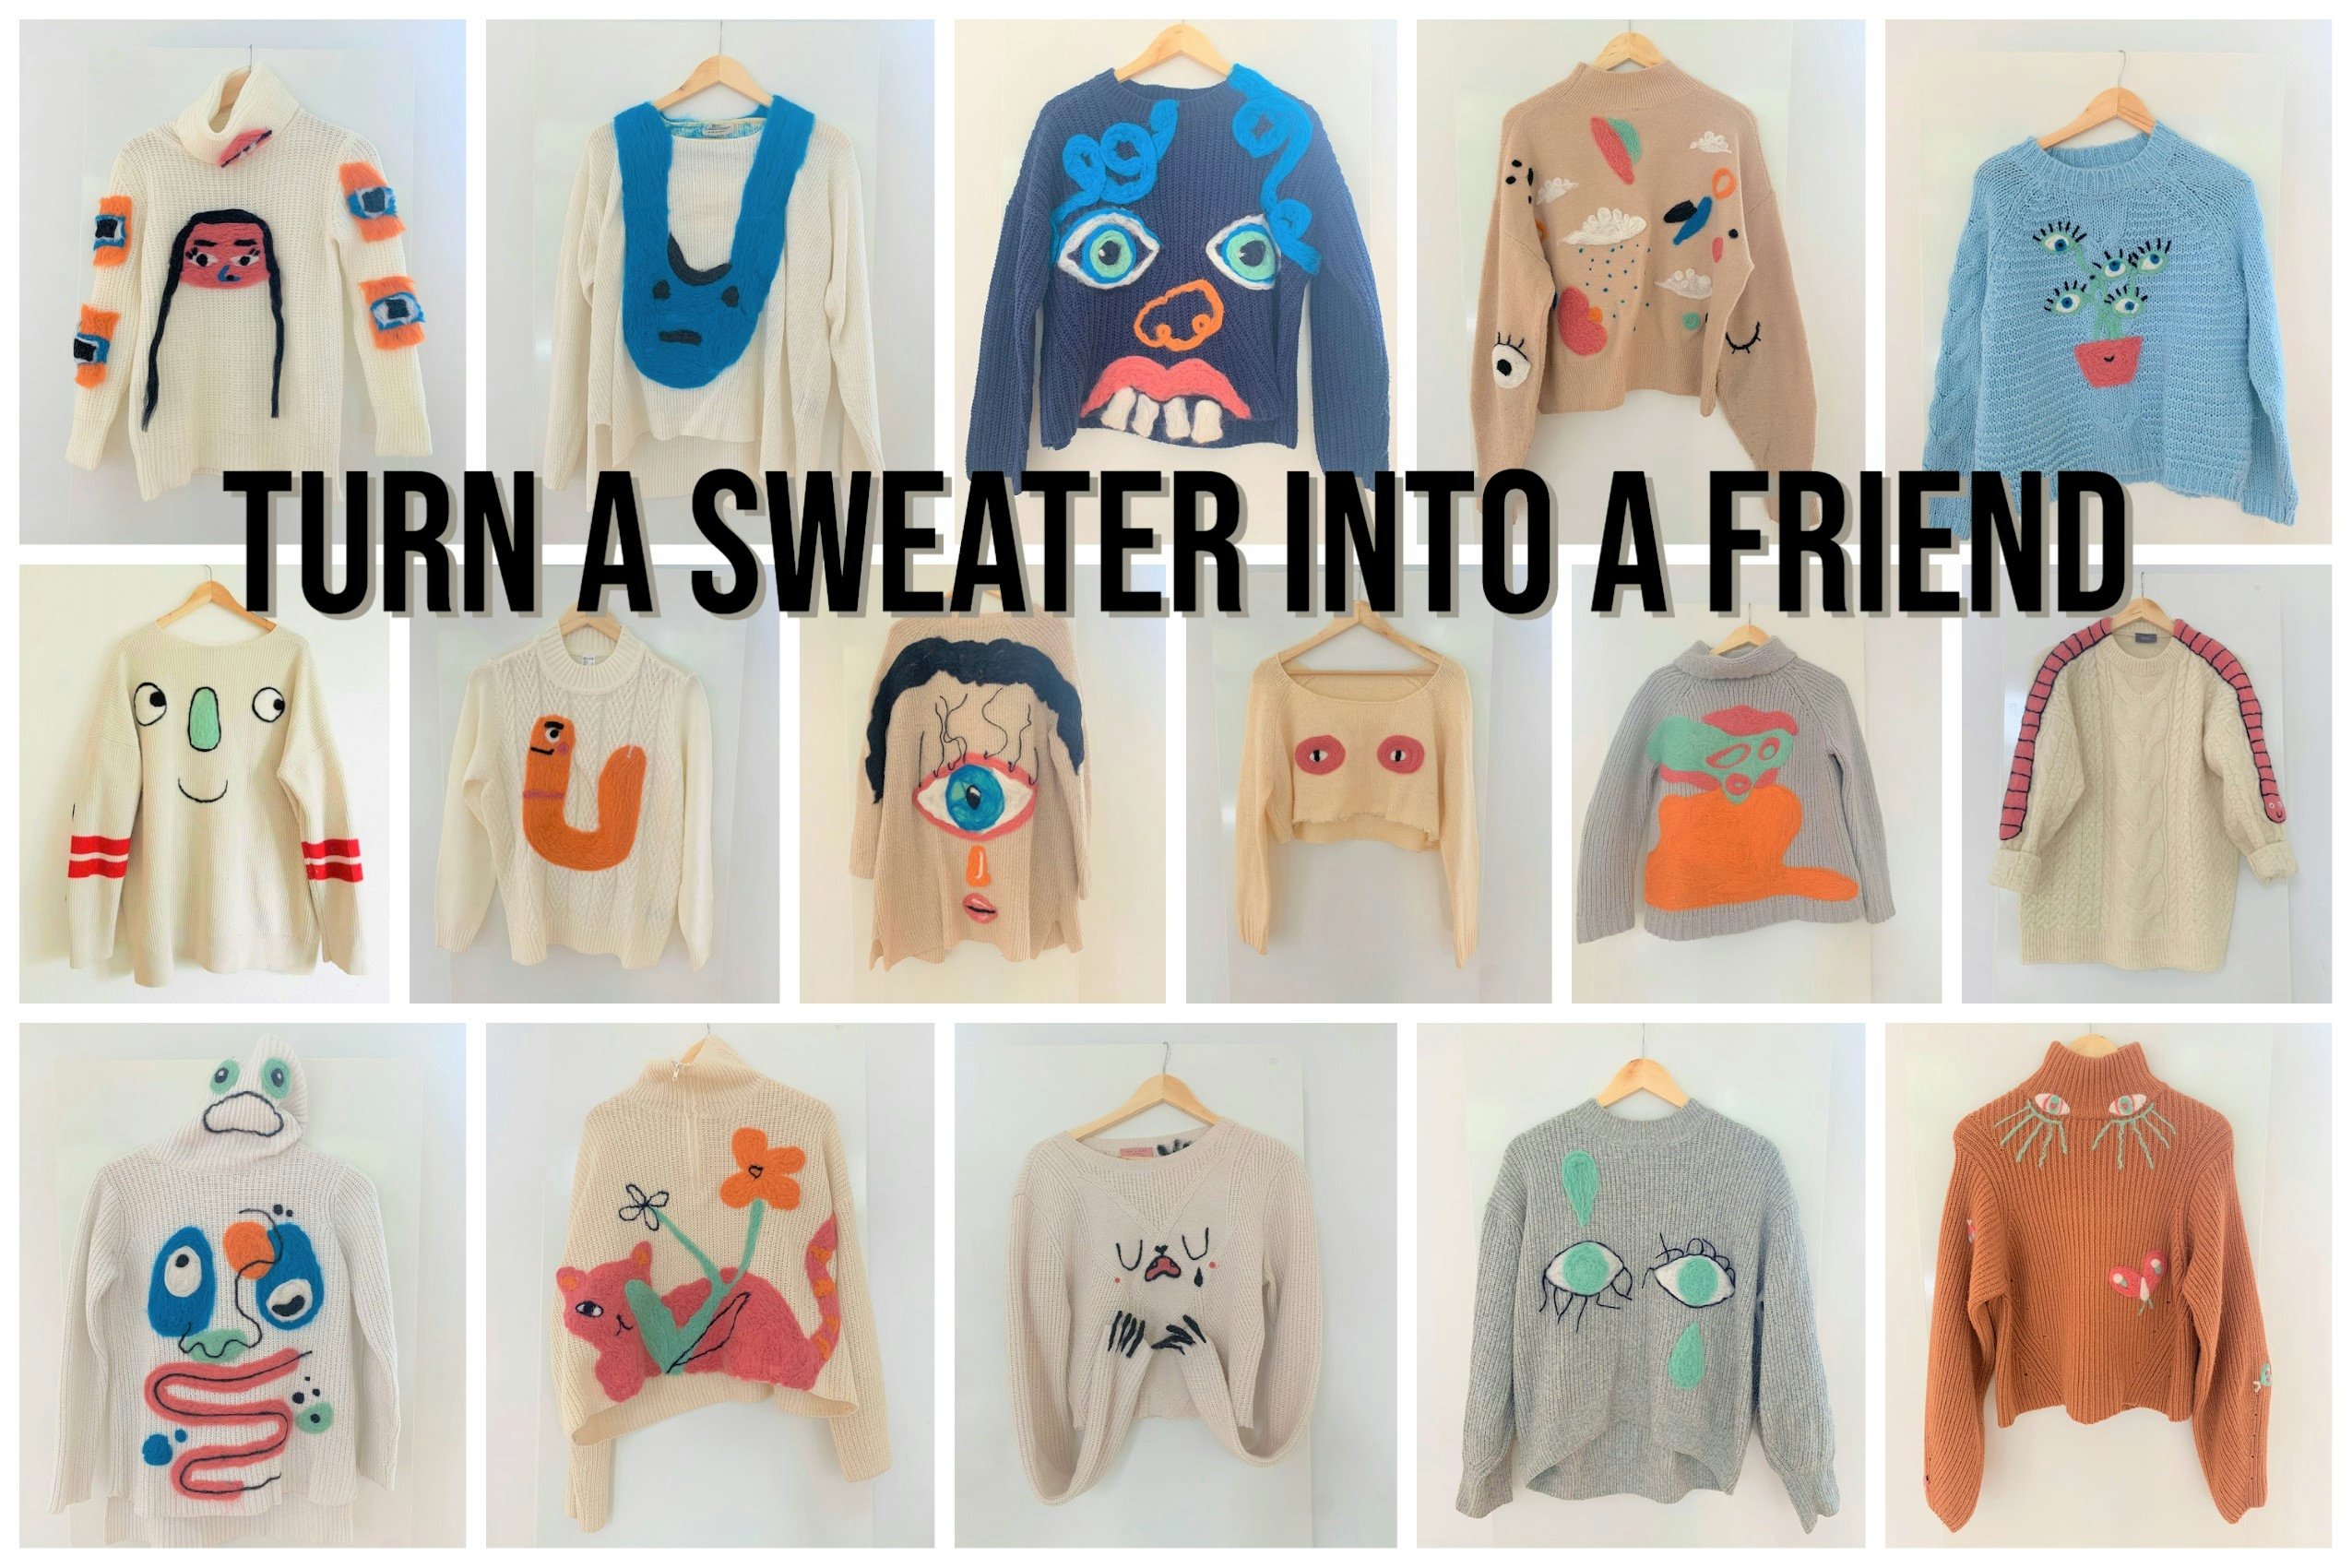 Part of an outcome of the workshop "Turn a sweater into a friend" hosted by Ýrúrarí at the Pictoplasma conference in Berlin 2021.